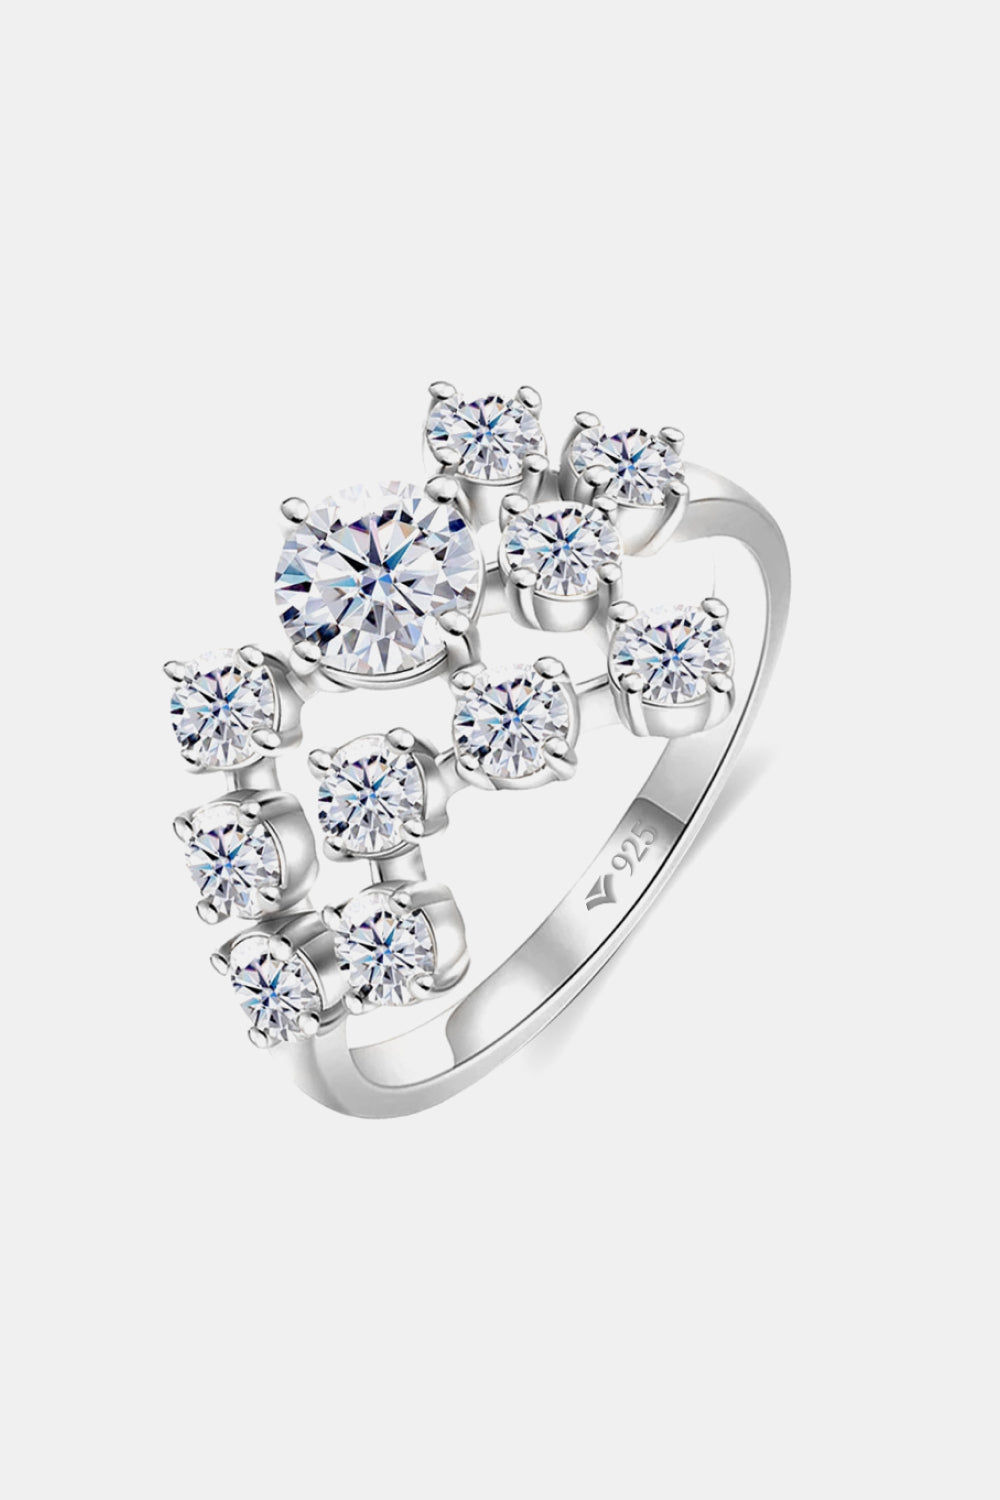 1.2 Carat Moissanite 925 Sterling Silver Ring-Rings-Inspired by Justeen-Women's Clothing Boutique in Chicago, Illinois